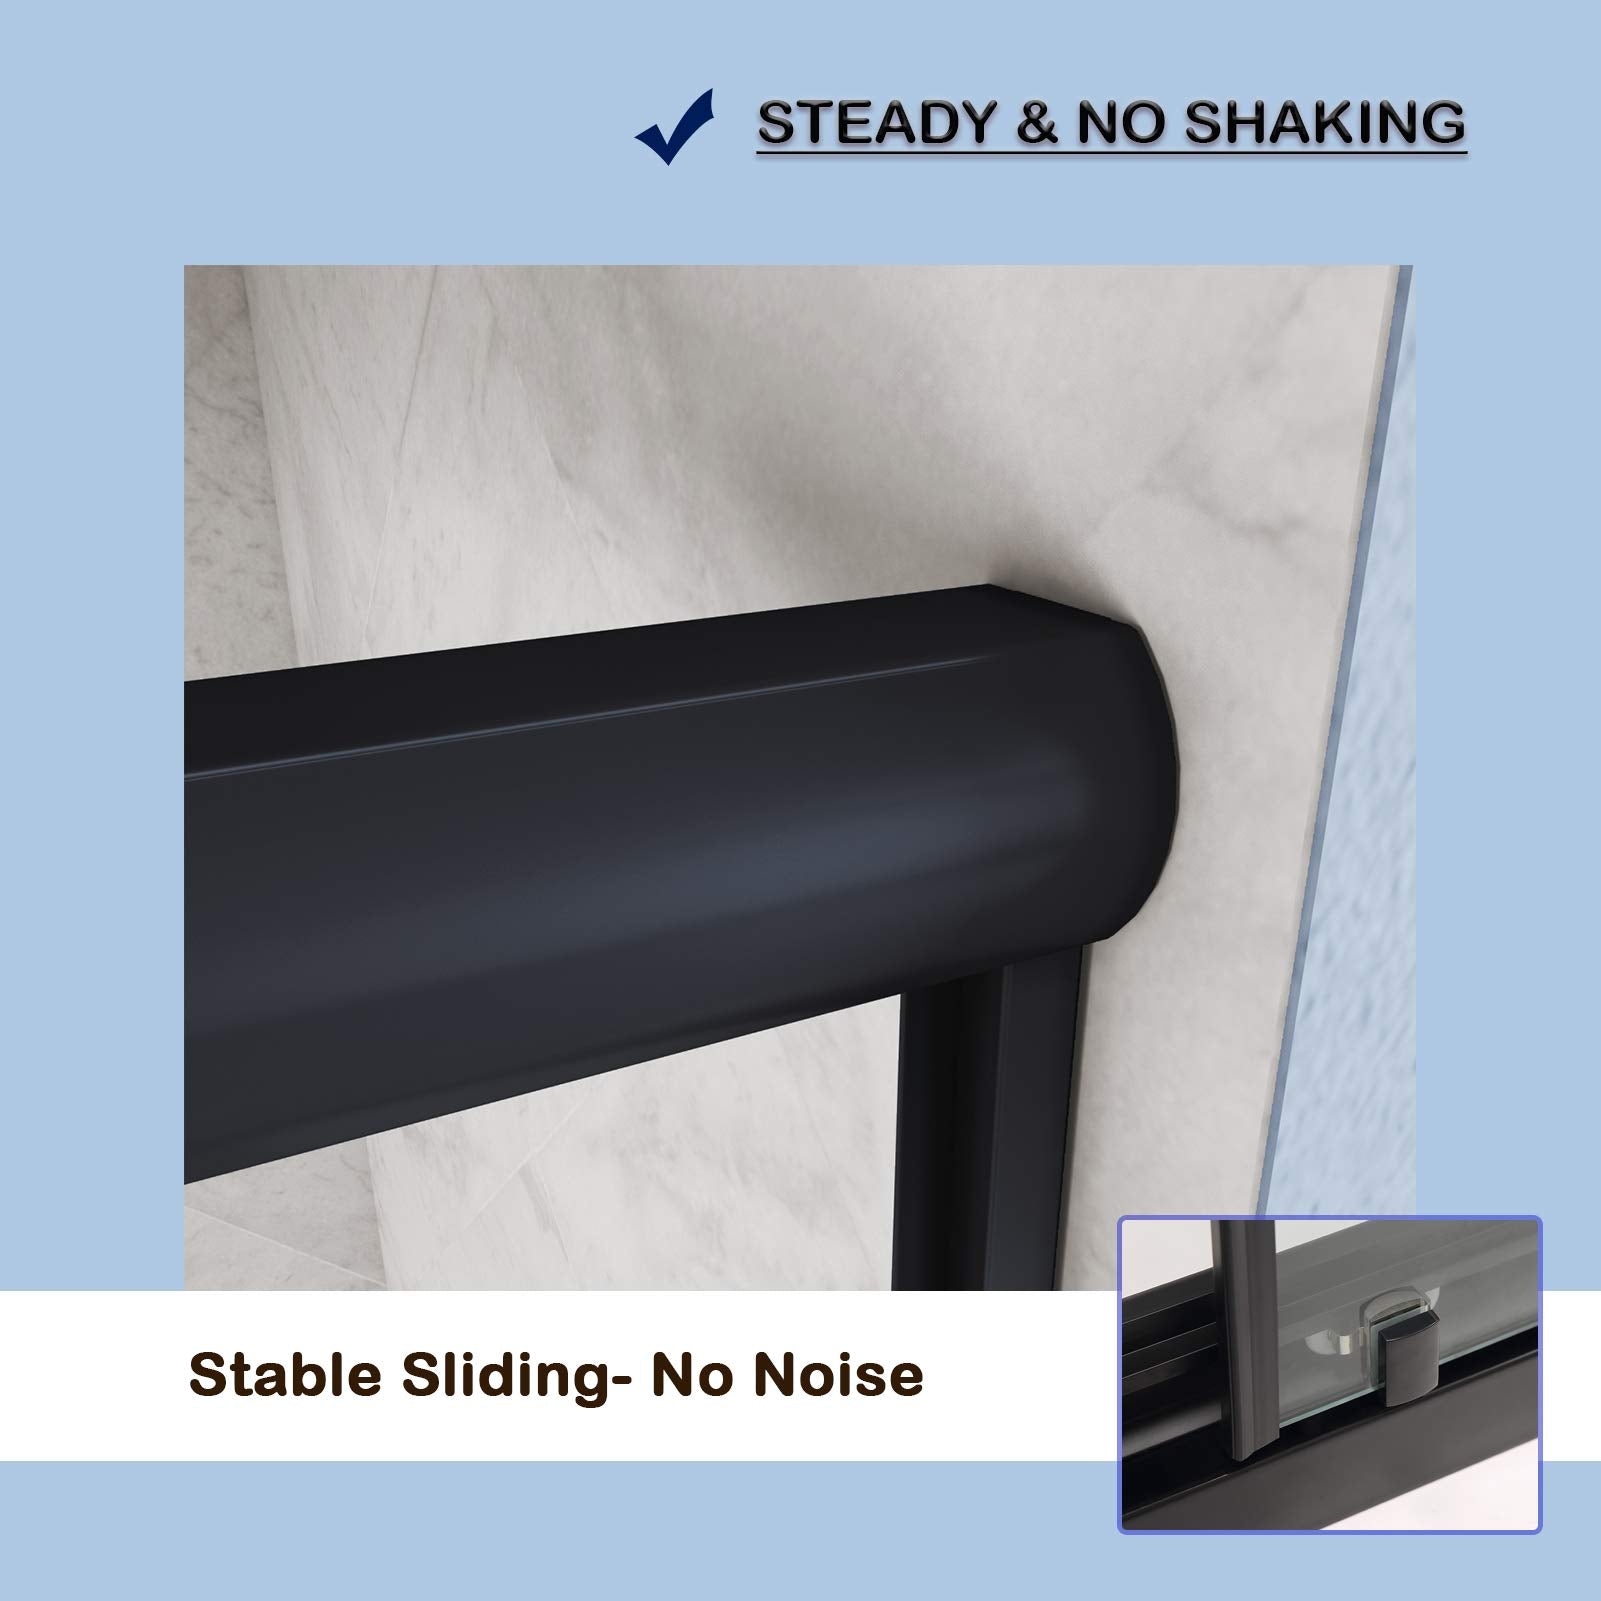 steady no shaking, stable sliding, no noise